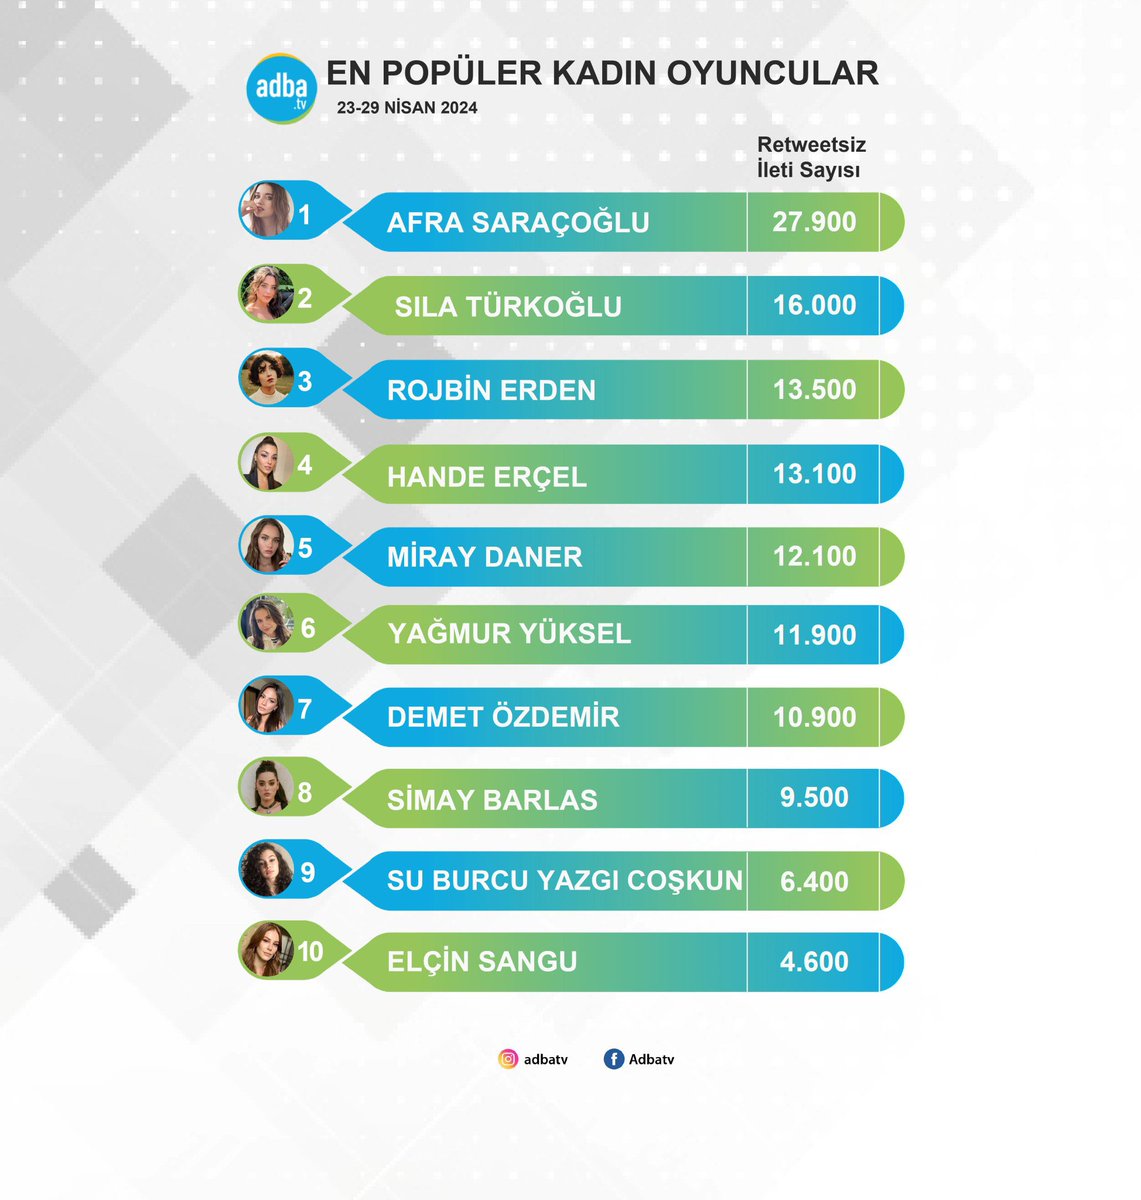 For the 3000 weeks the Queen is on top as she deserves! 🫶🏻🫶🏻 #AfraŞaraçoğlü